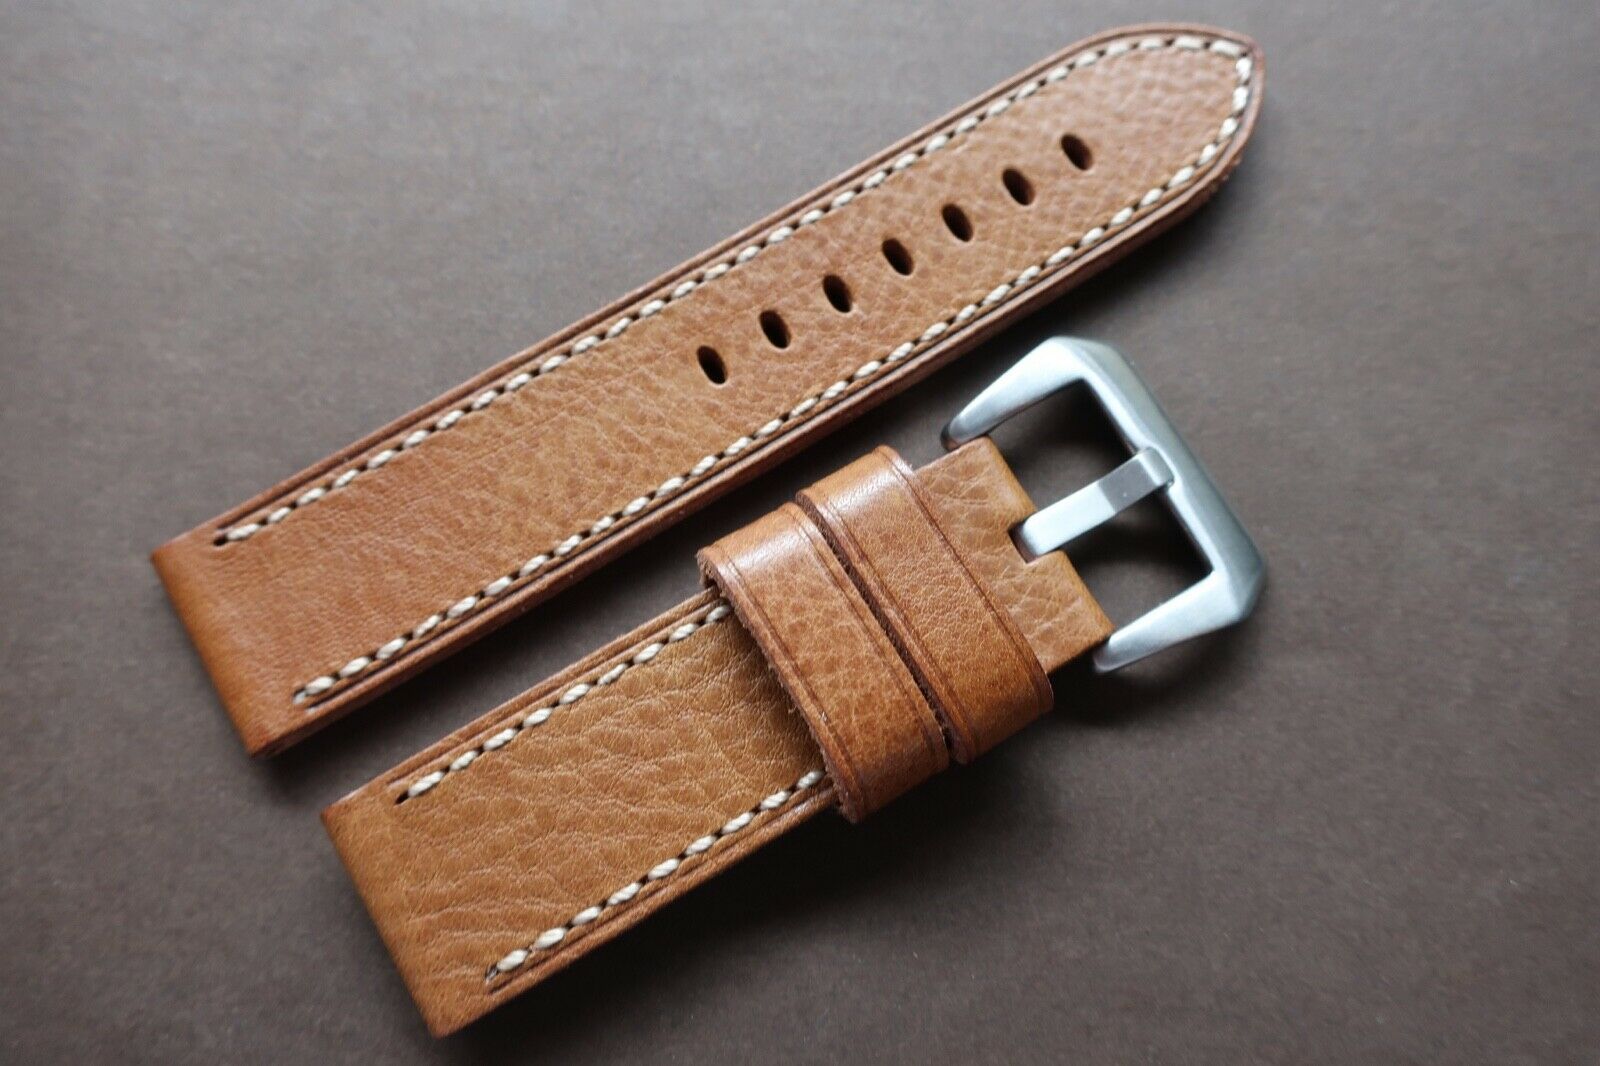 Primary image for Leather strap in 24mm - Light Brown leather in 24/24mm - Handmade Panerai Style